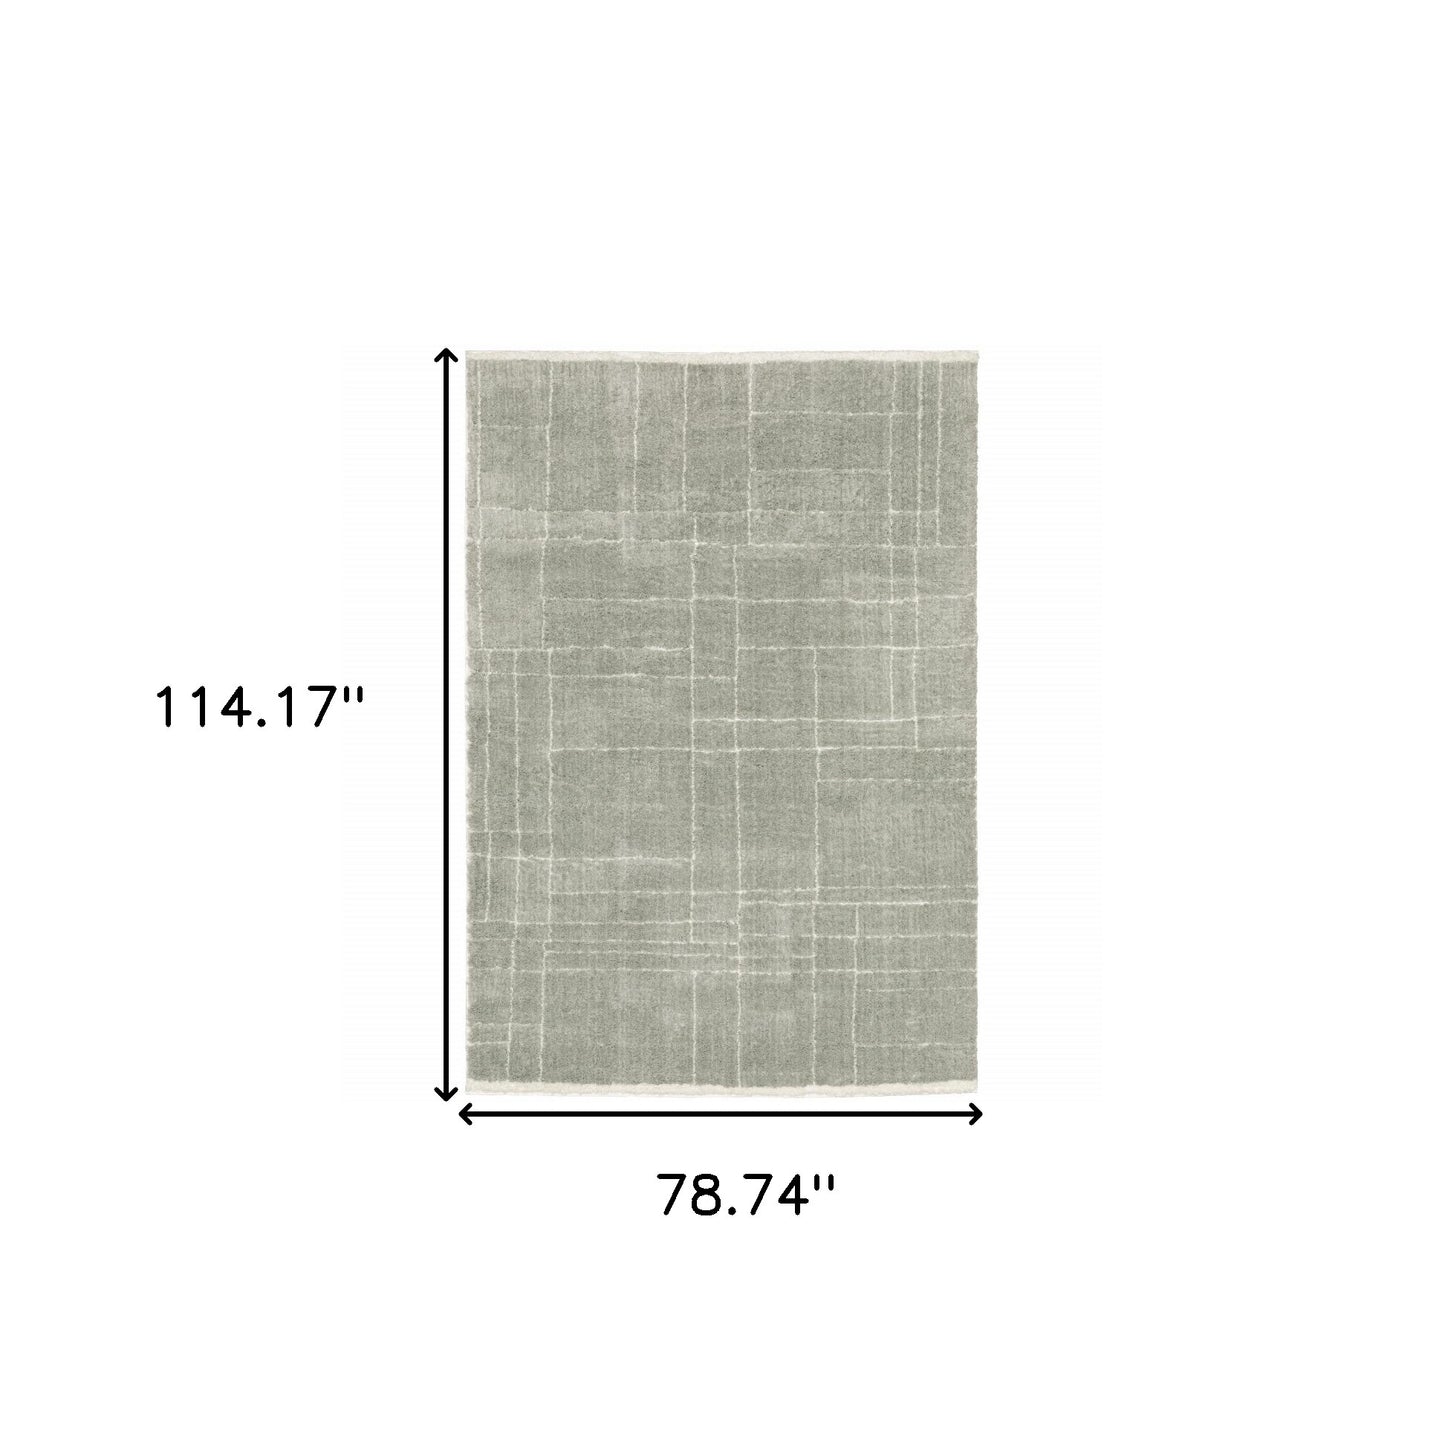 6' X 9' Grey And Ivory Geometric Shag Power Loom Stain Resistant Area Rug